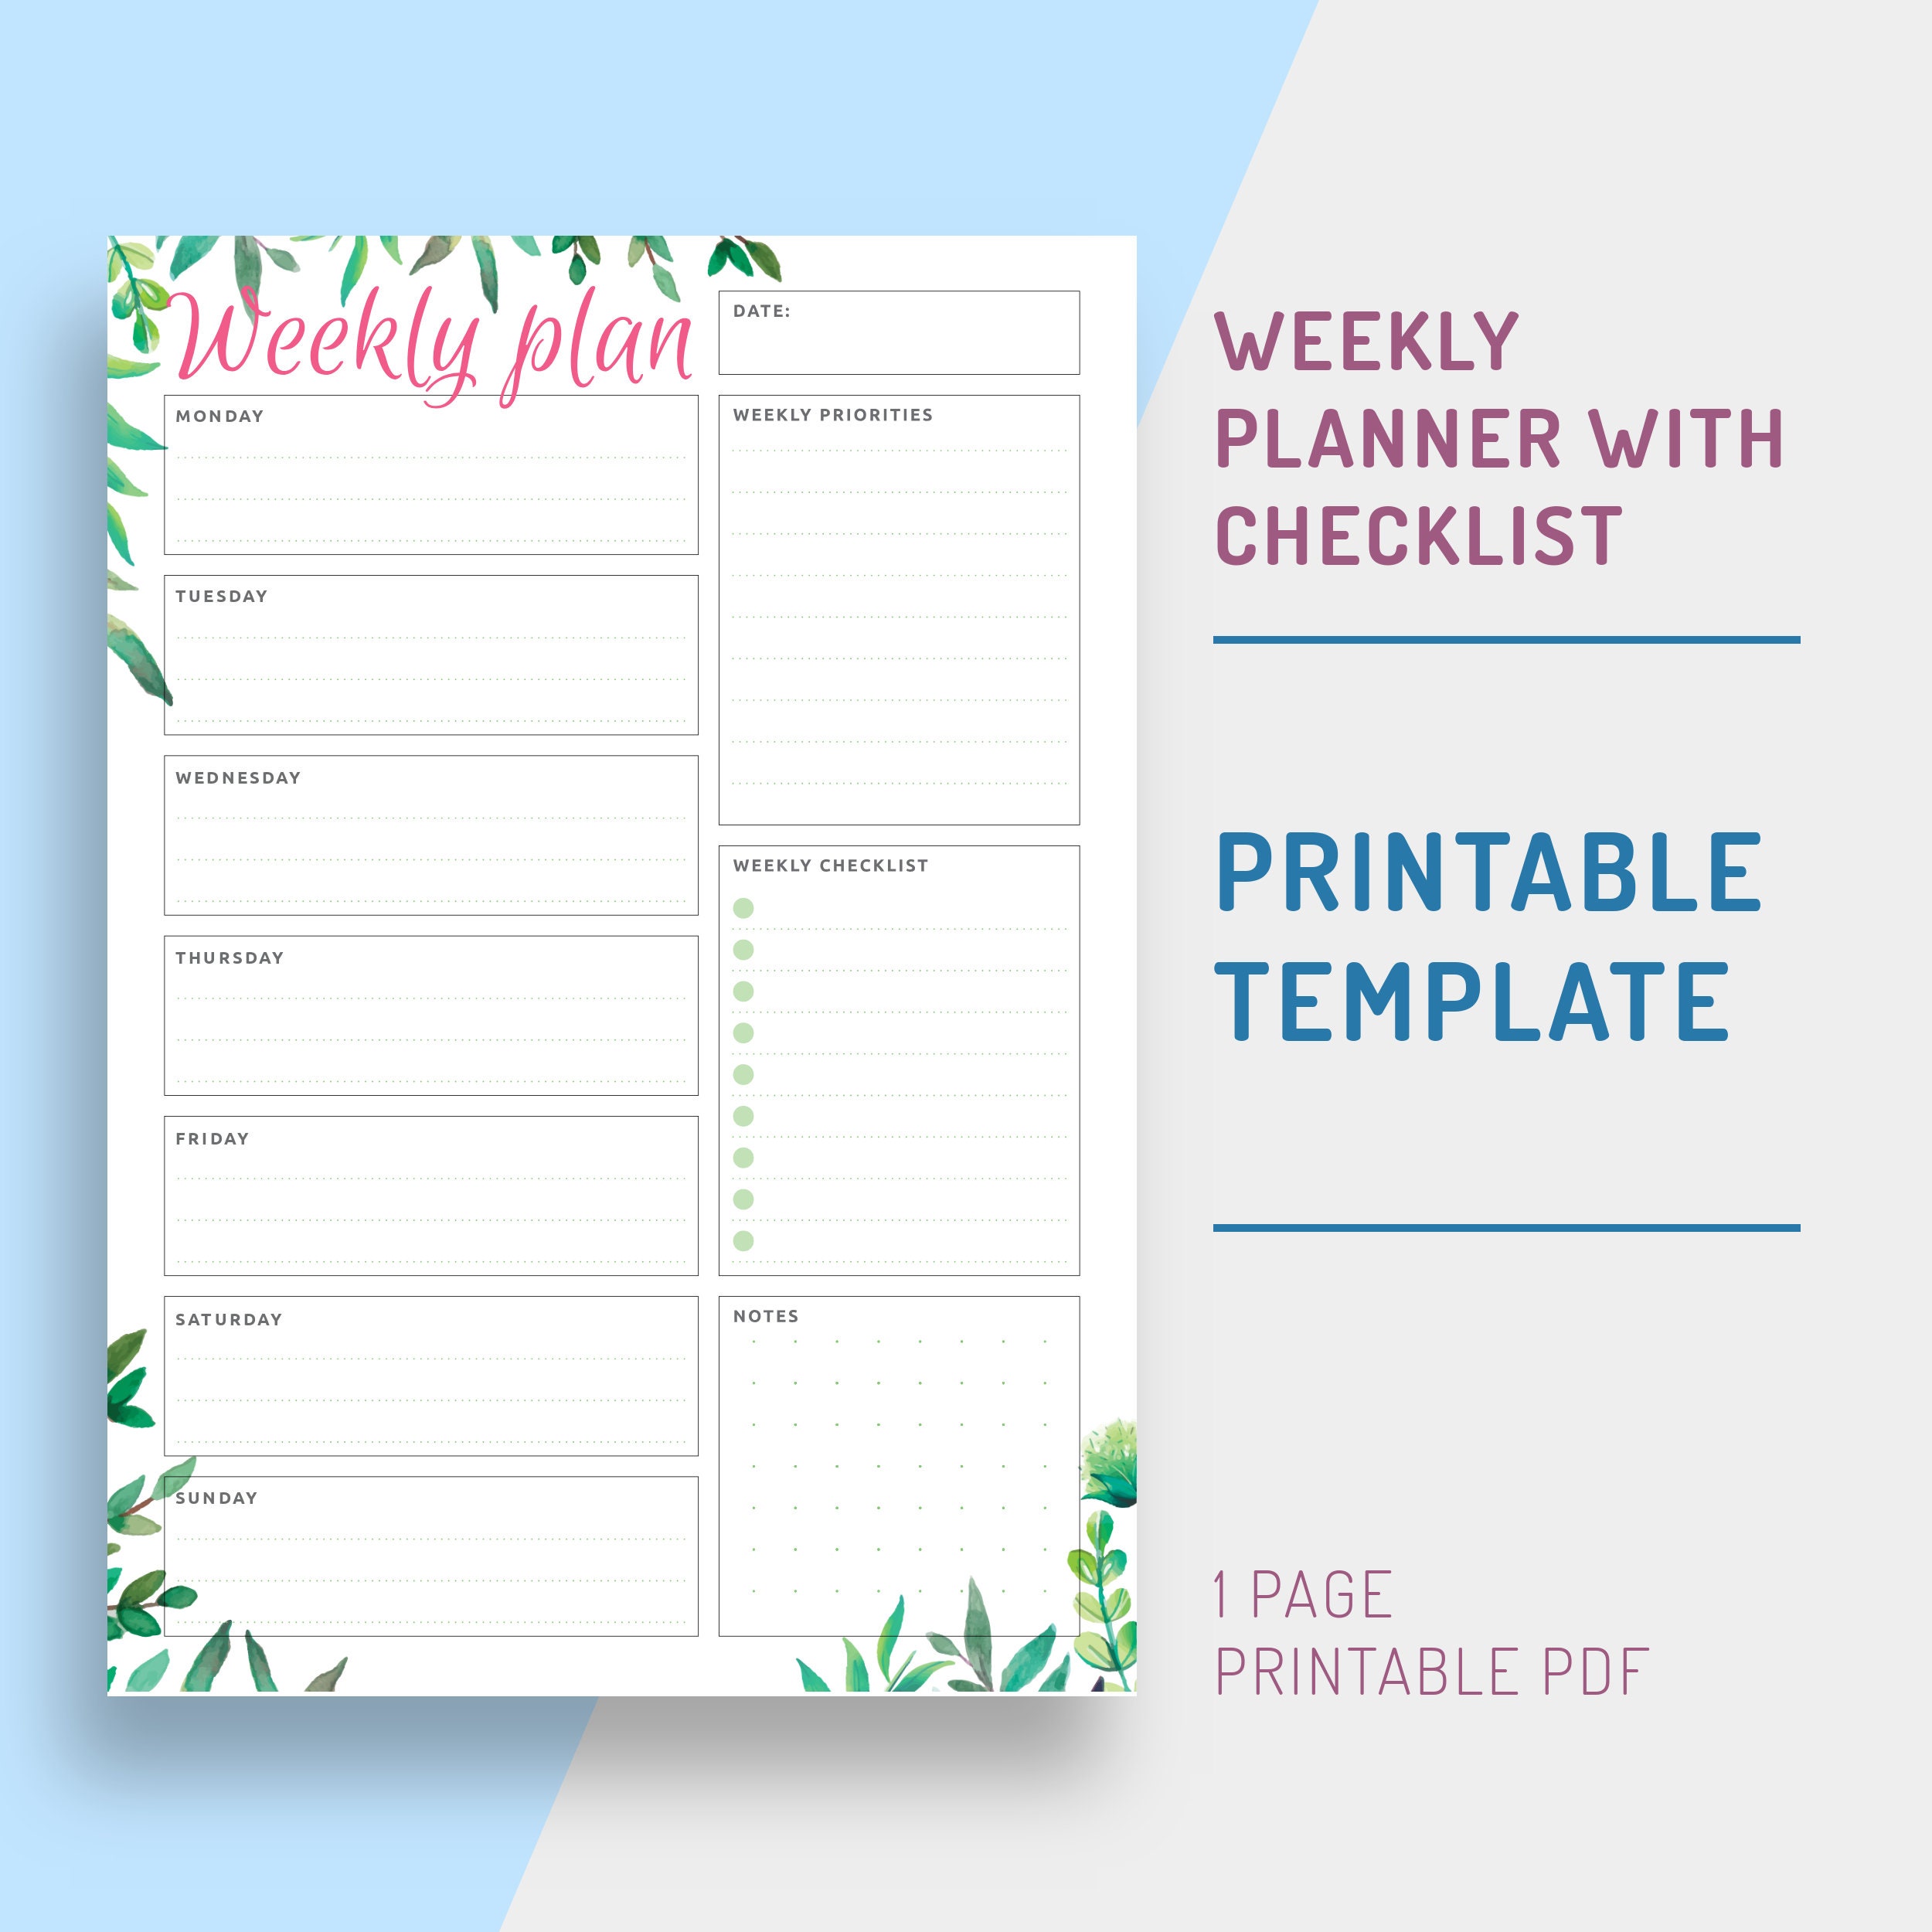 Undated Weekly Planner a5 Printable Vertical One Page | Etsy